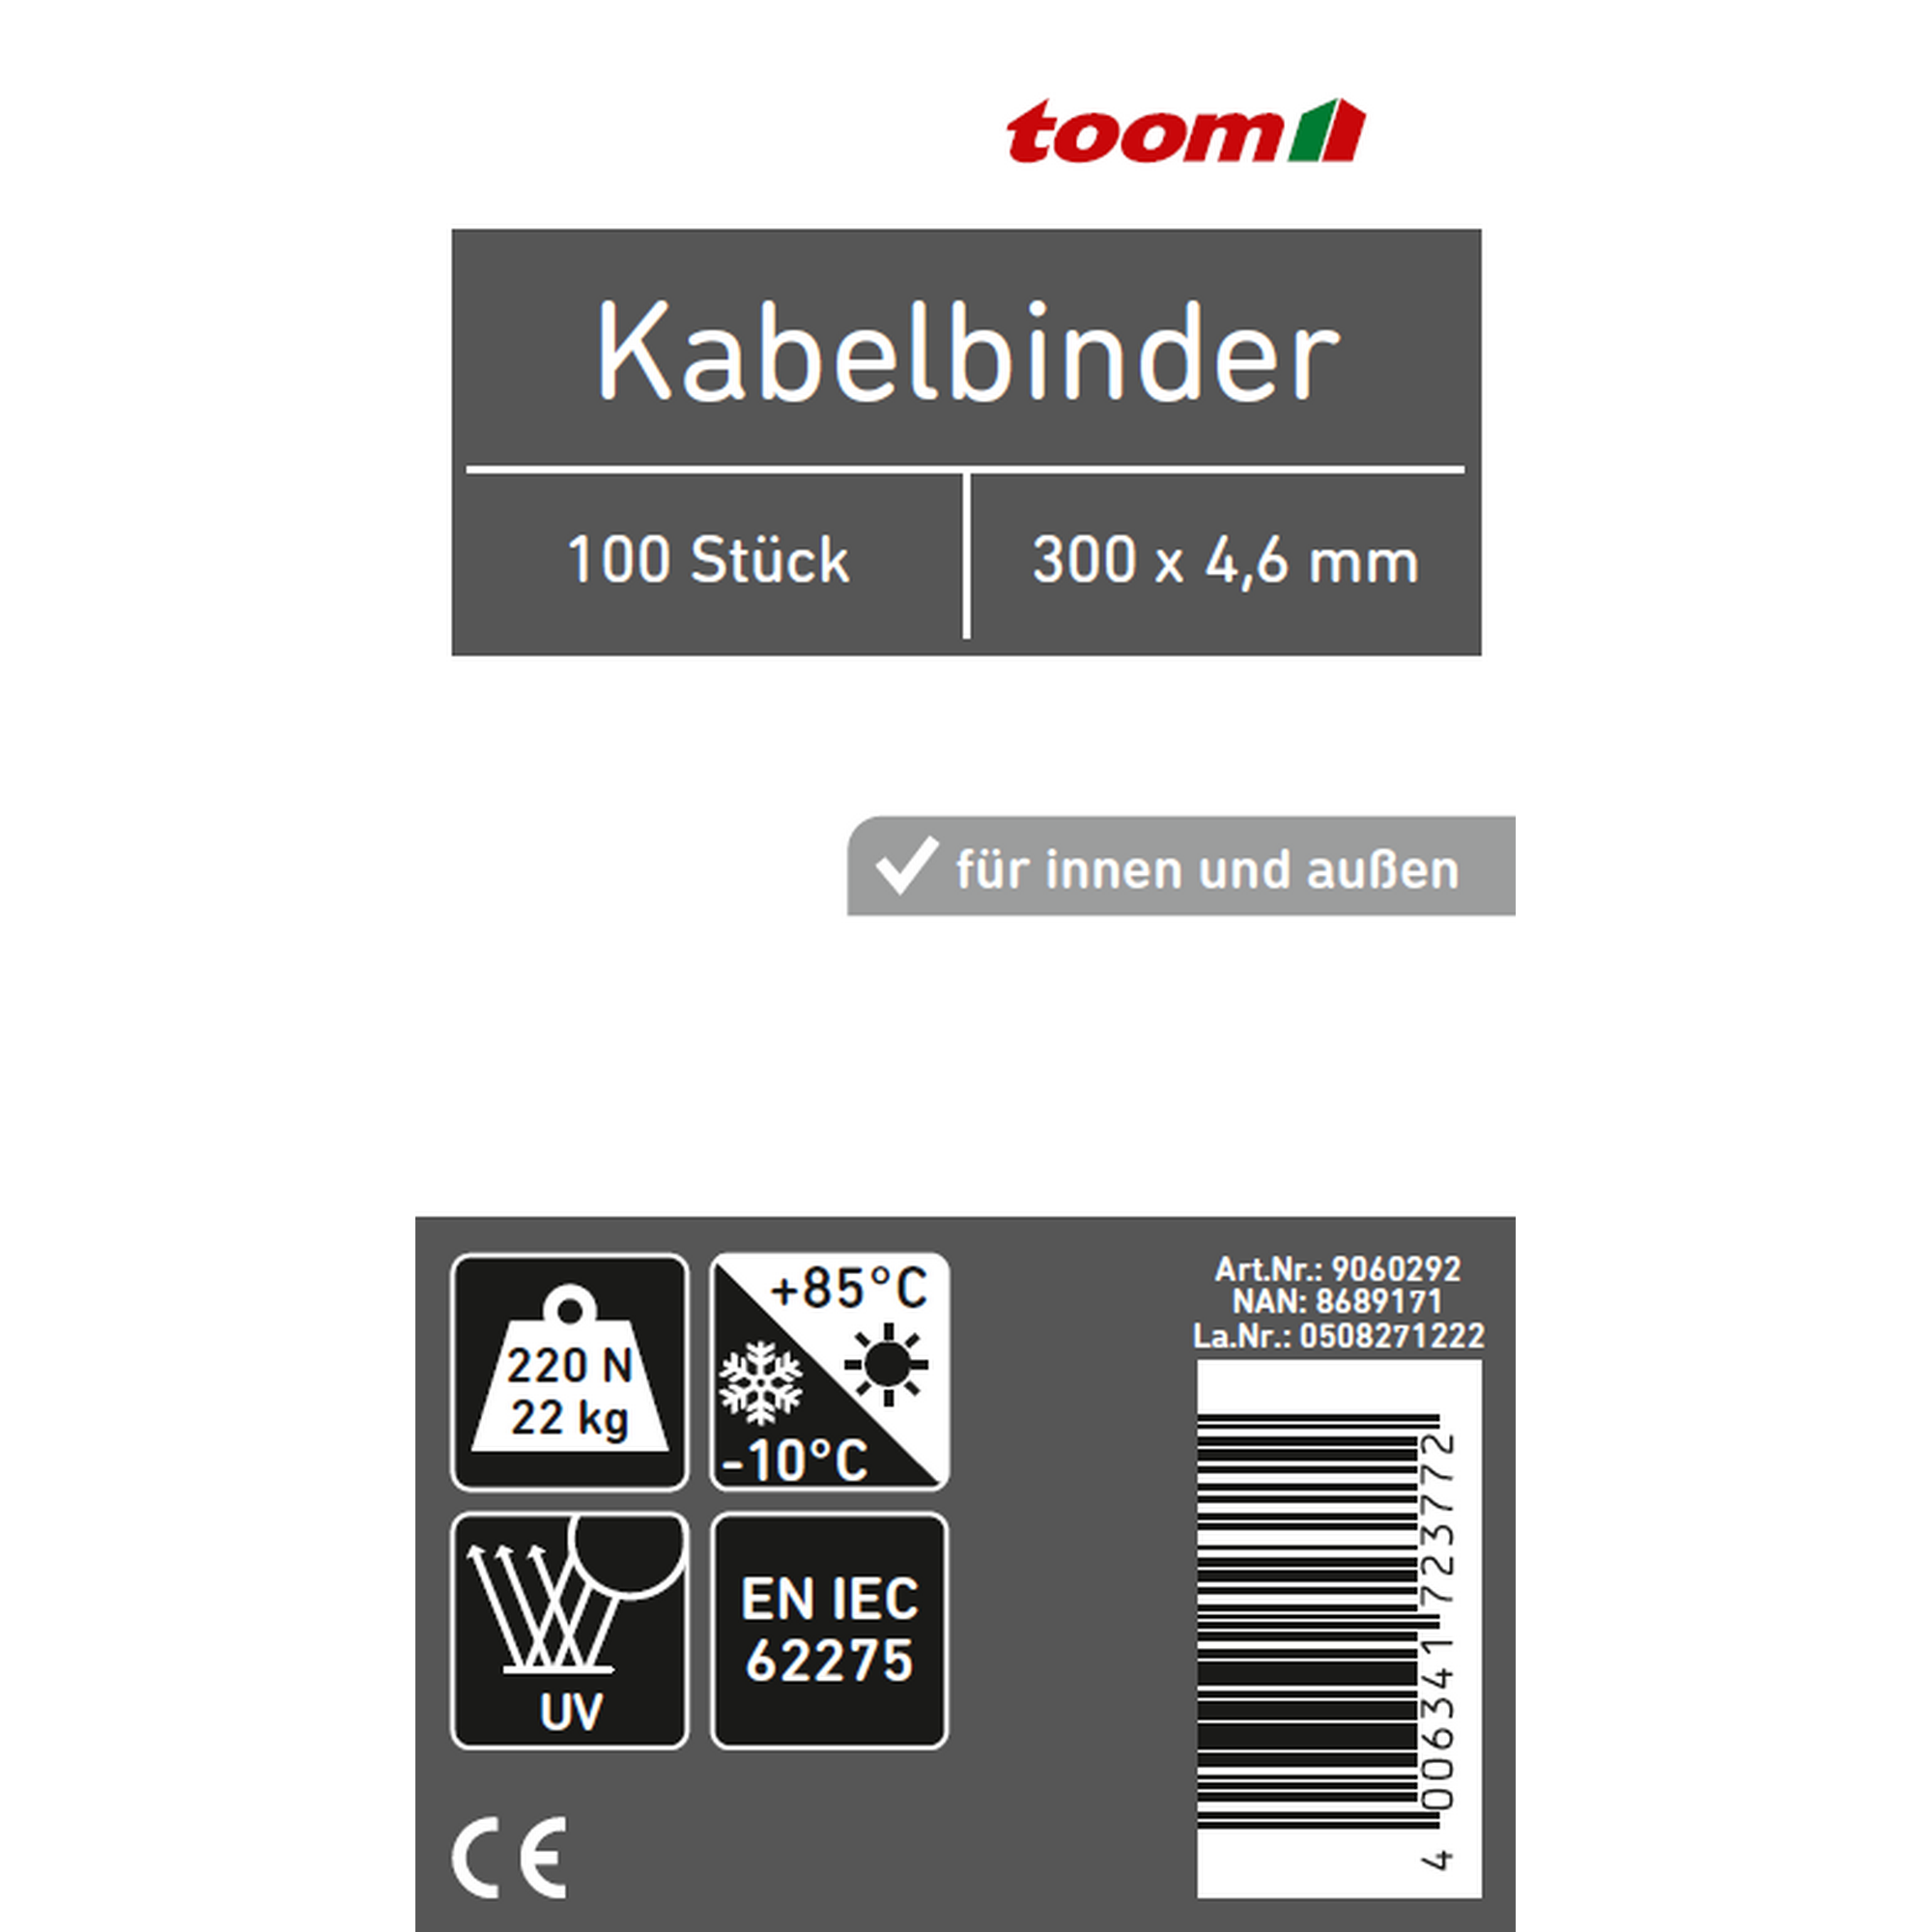 Kabelbinder weiß 4,6 x 300 mm 100 Stück + product picture